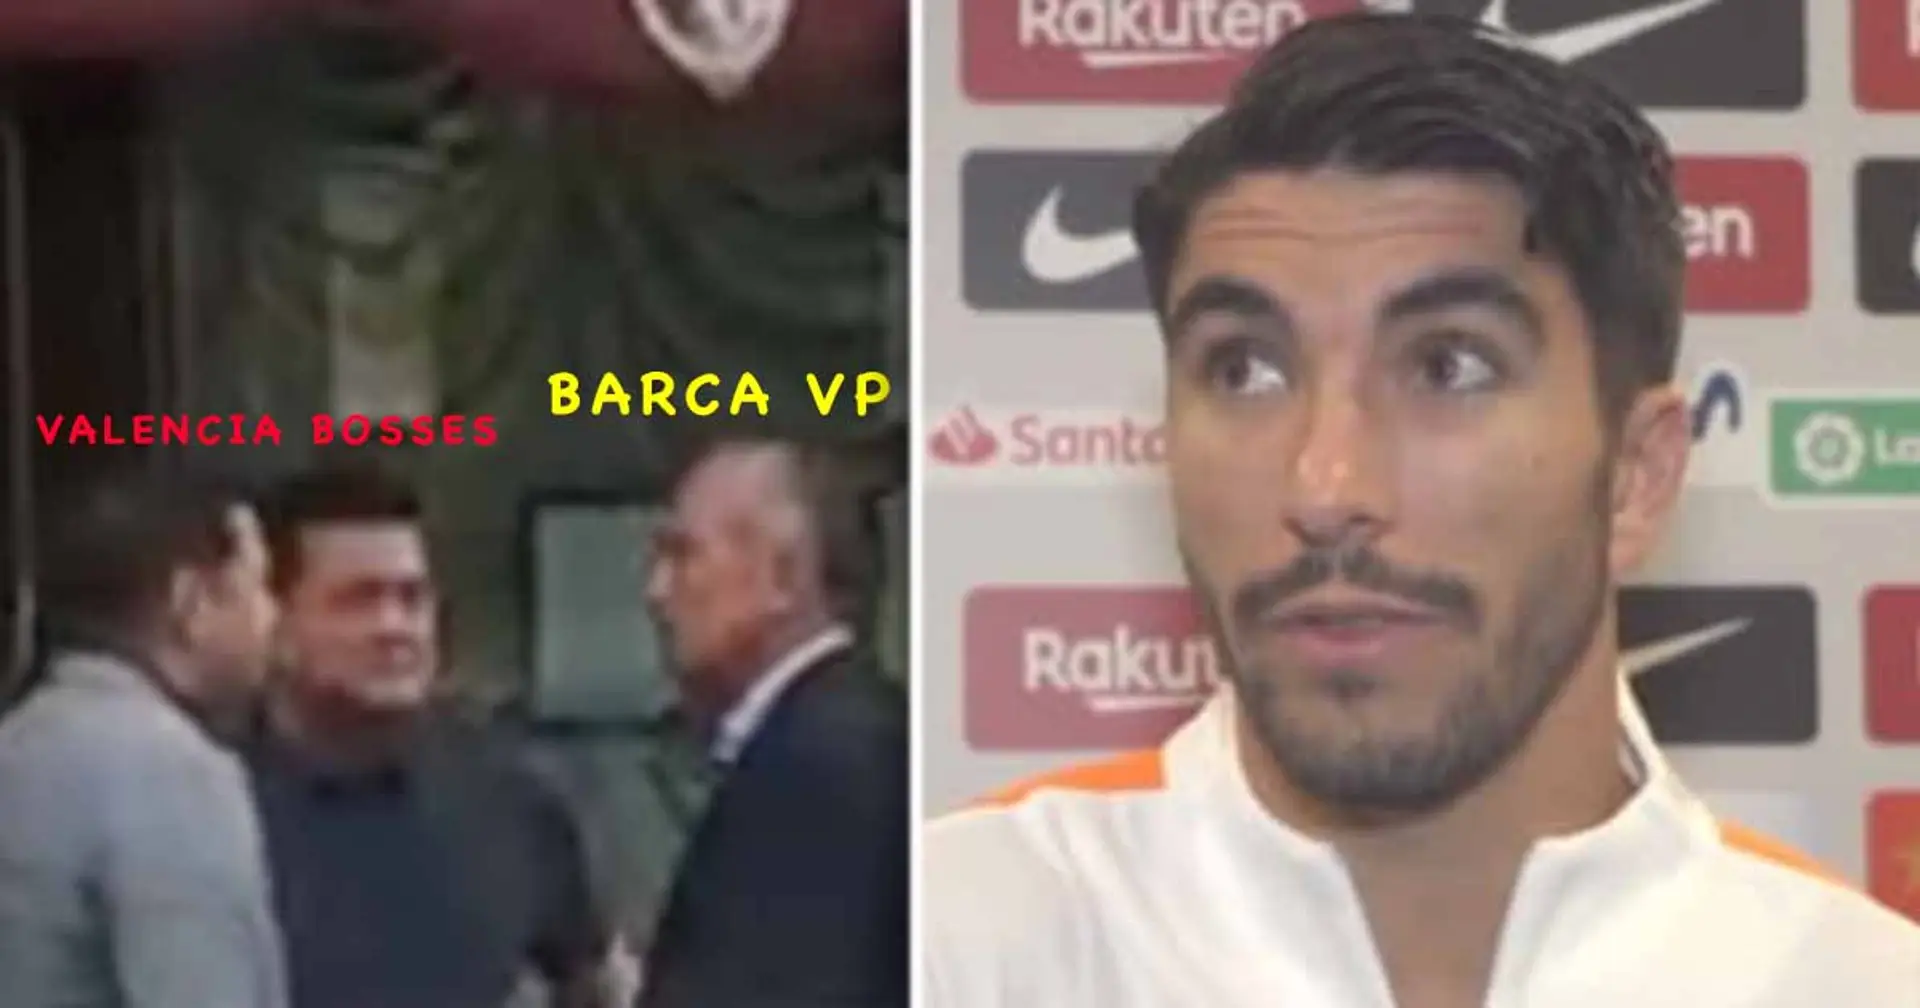 Valencia want €60m for Soler and Gaya, Laporta's response revealed (reliability: 5 stars)